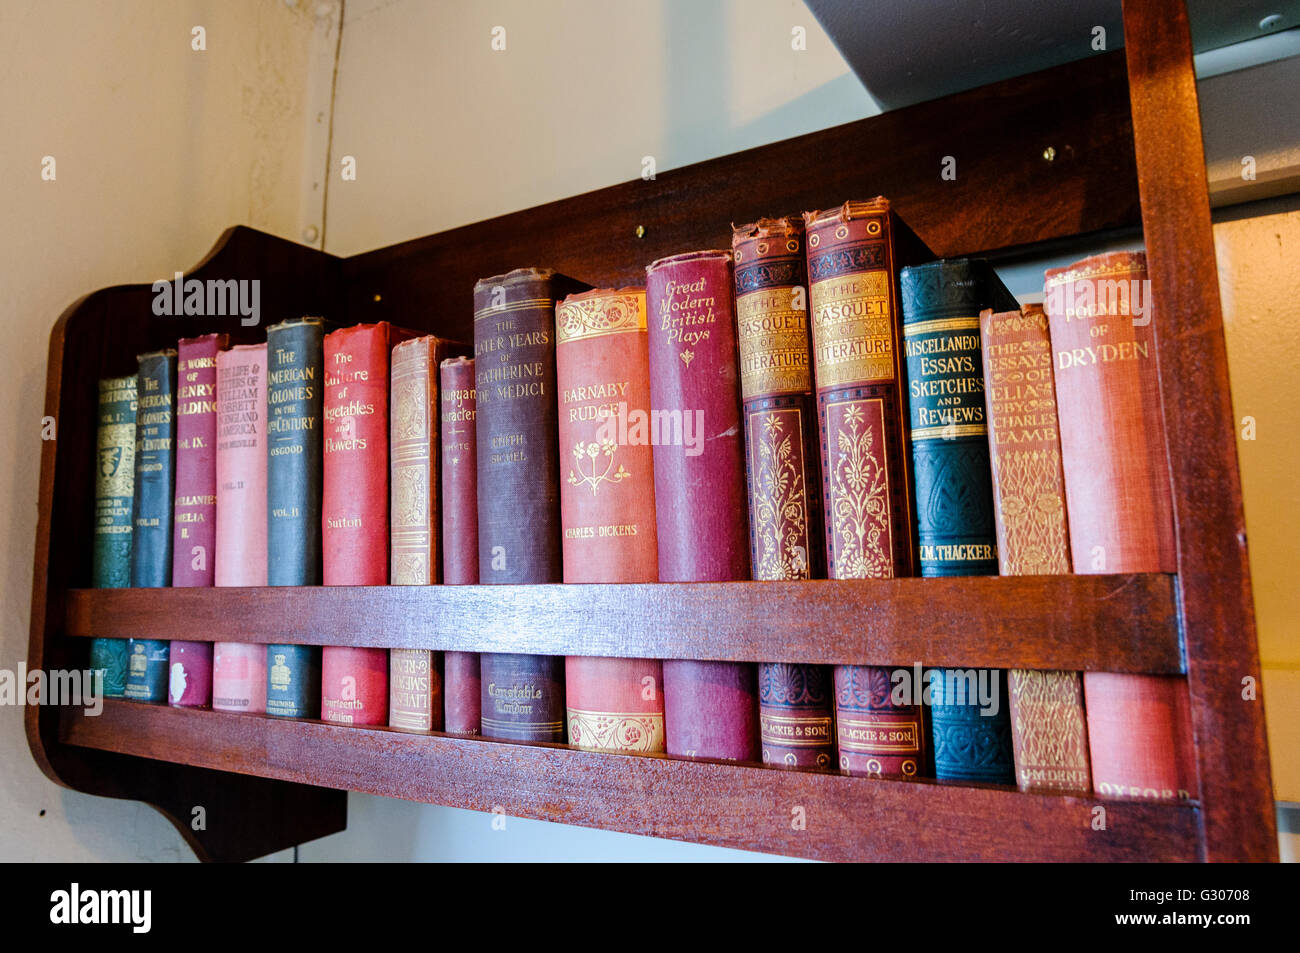 Small bookshelf with old books from around 1900-1915, including English Literature Classics such as Dickens and Thacker. Stock Photo